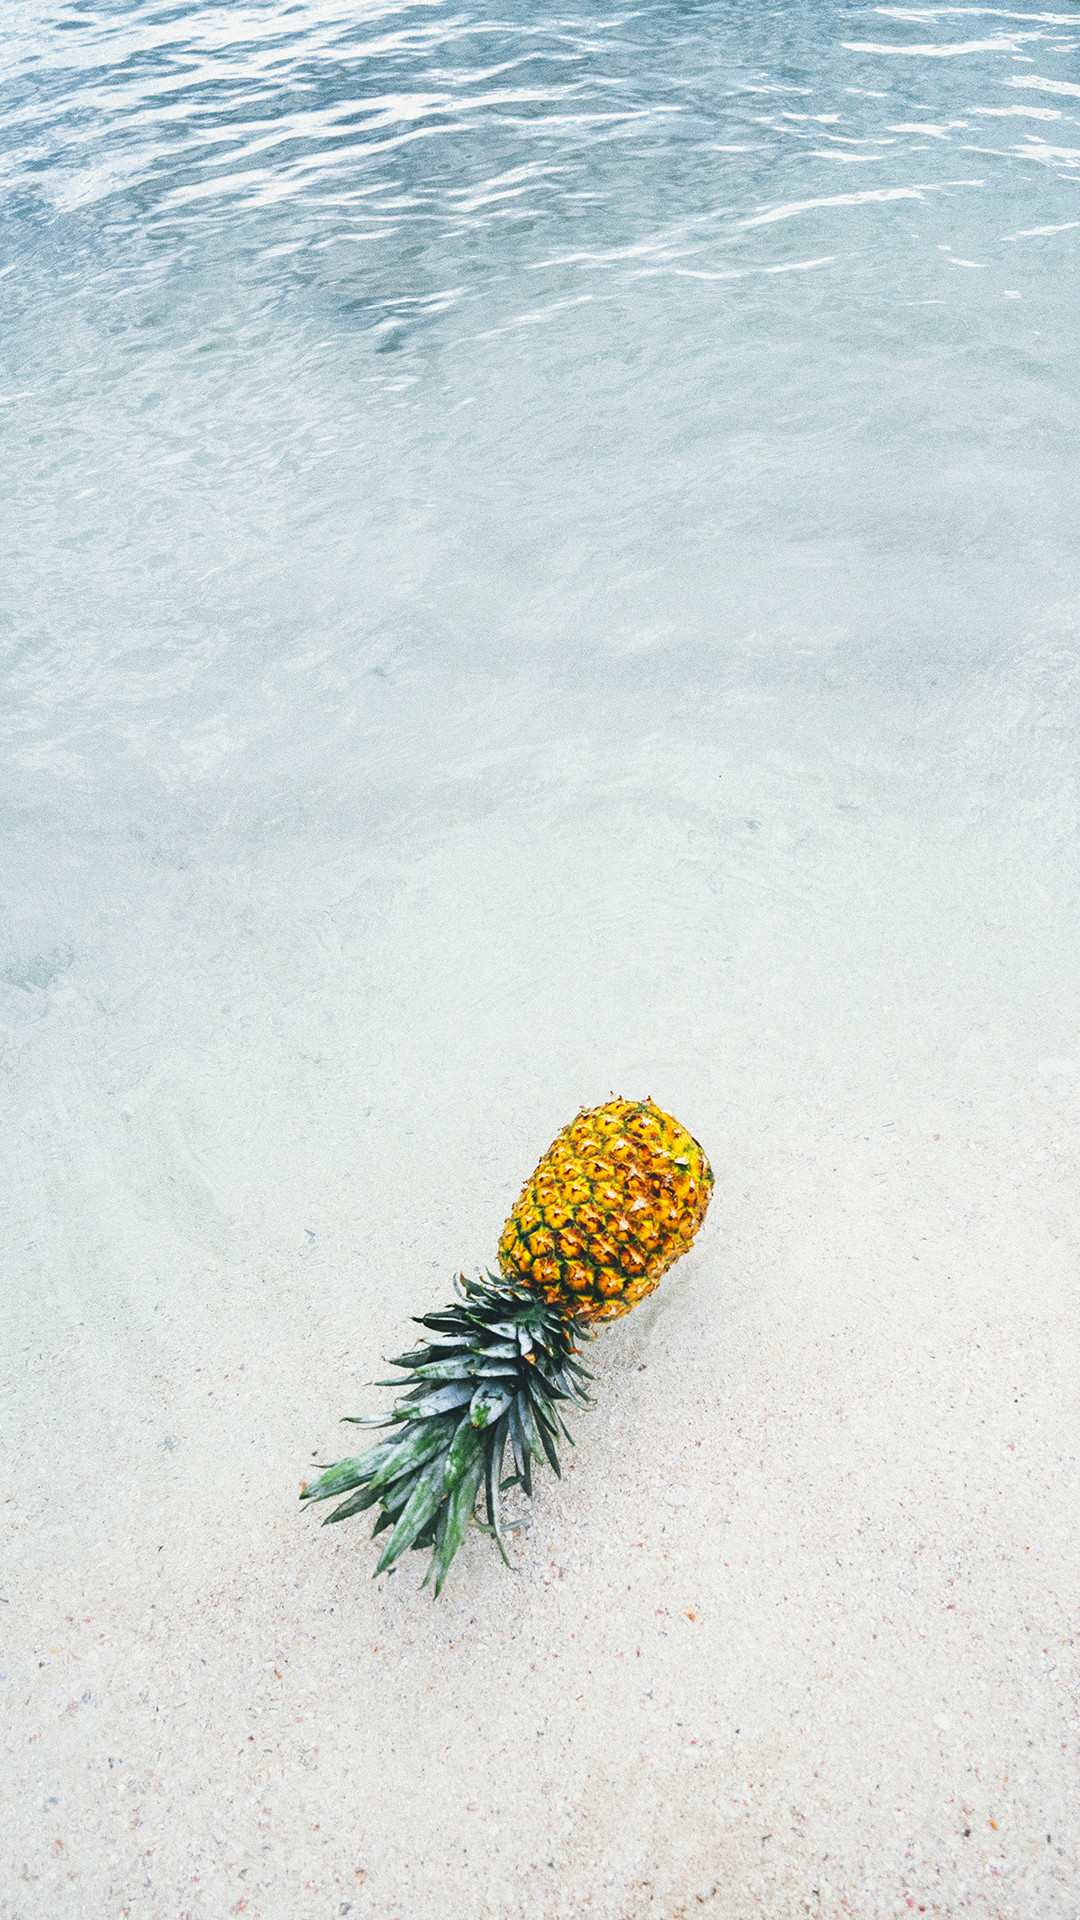 1080x1920 download this cool pineapple background